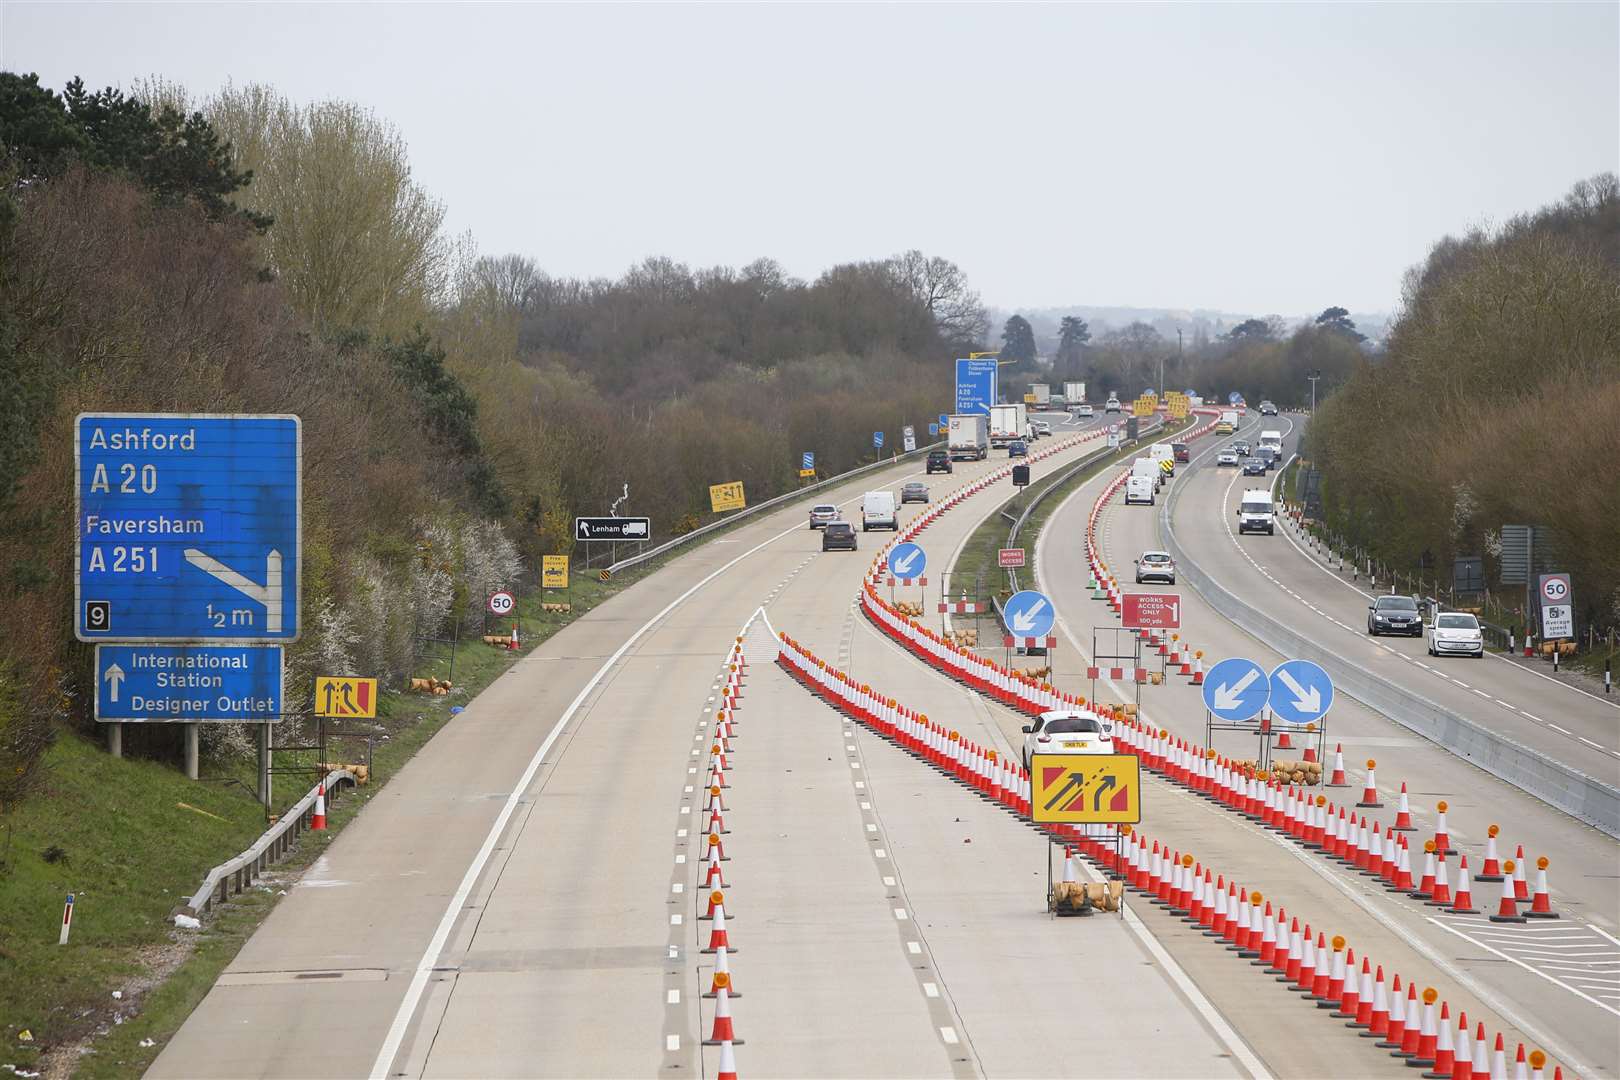 Operation Brock in place on M20 between junctions 8 and 9